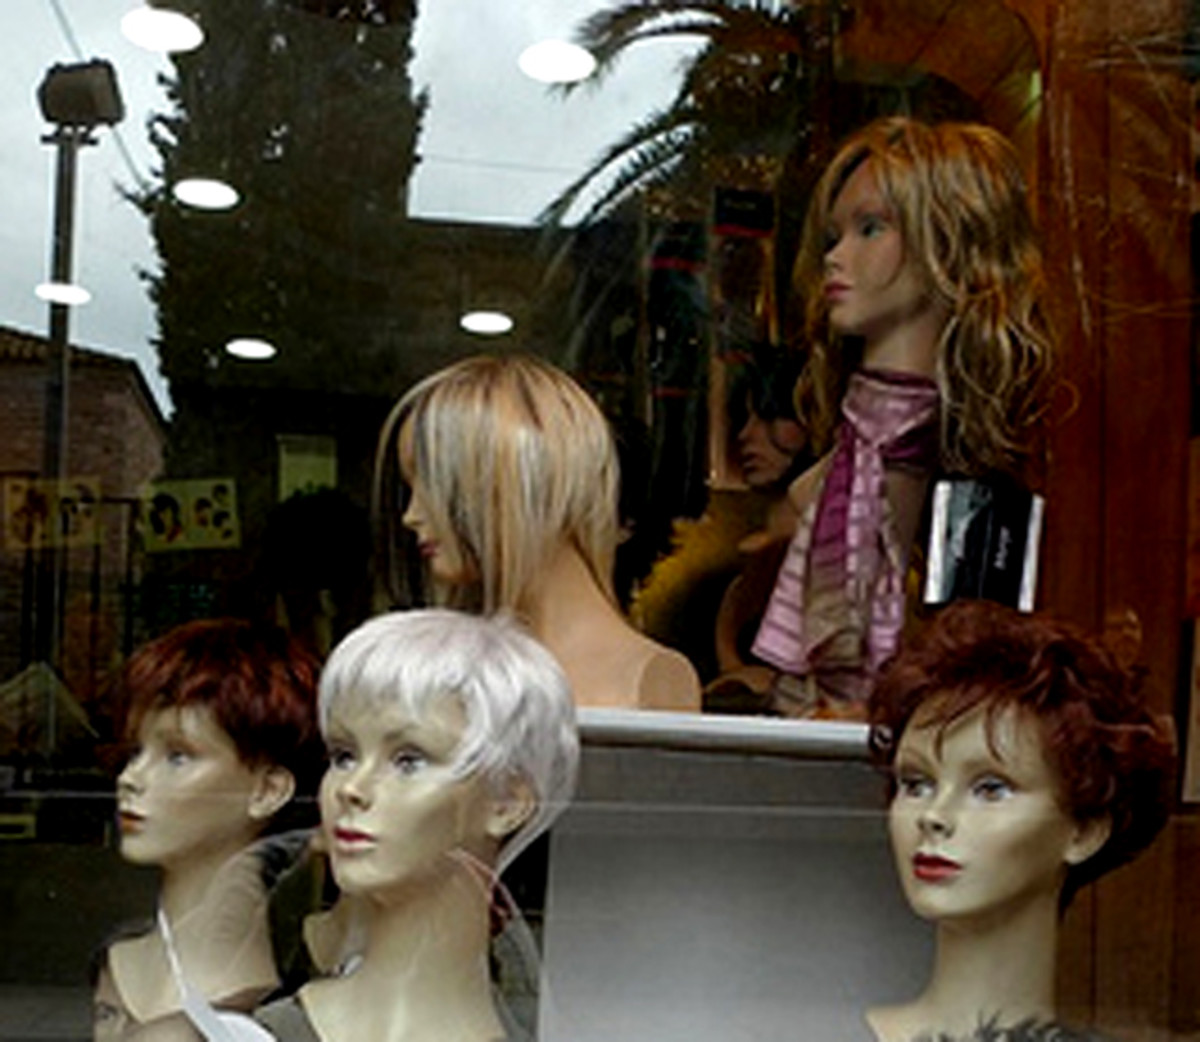 Wigs are an inexpensive alternative to hair replacement procedures.